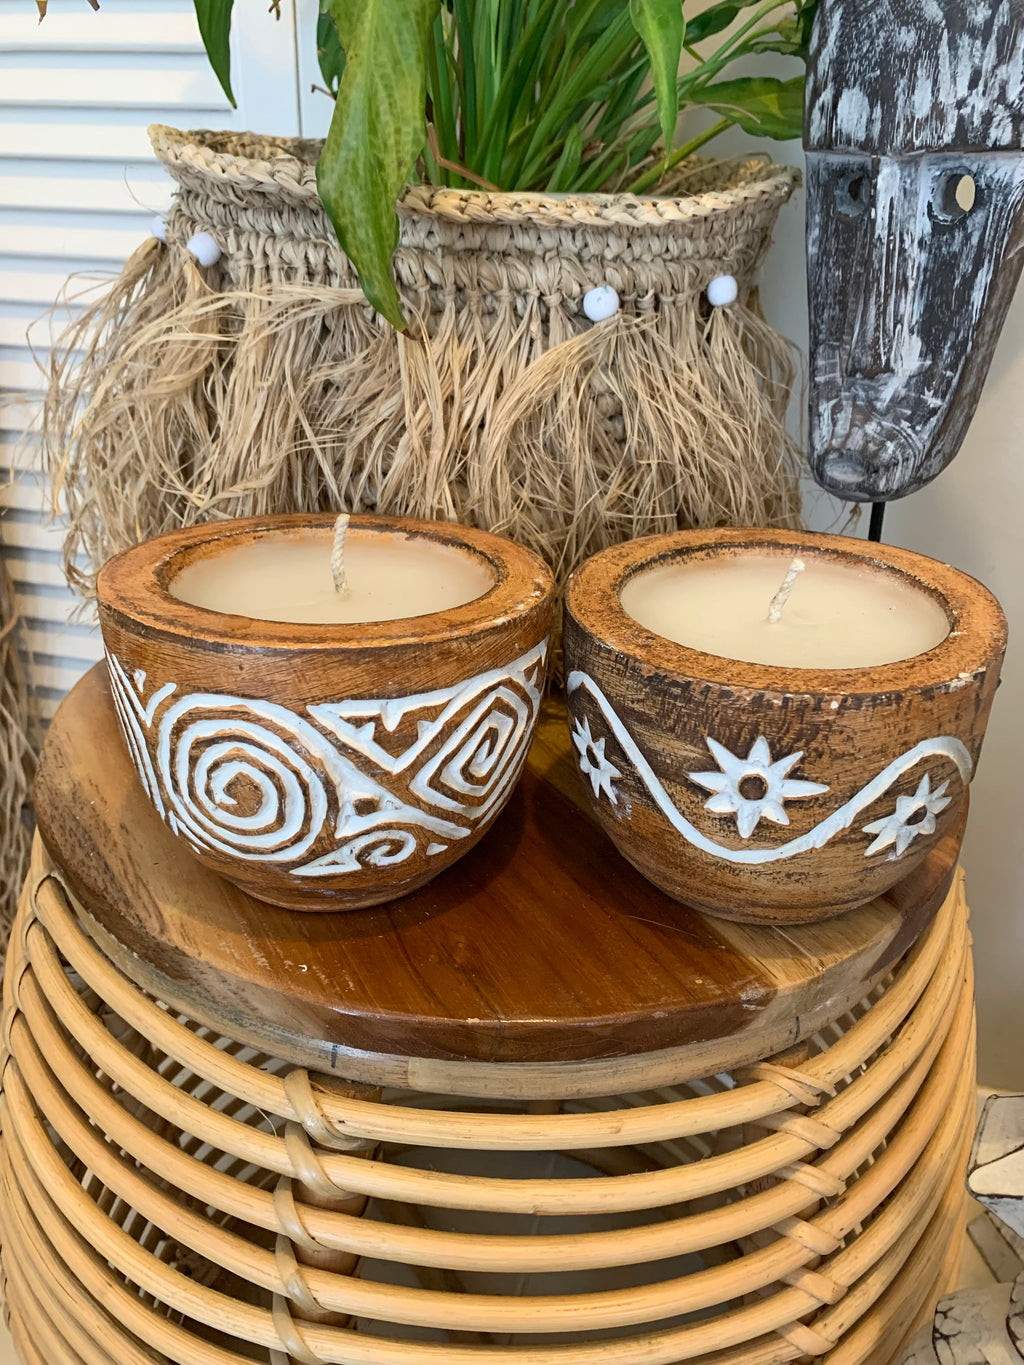 Handcarved timber candle. Available in black or white. $25 each